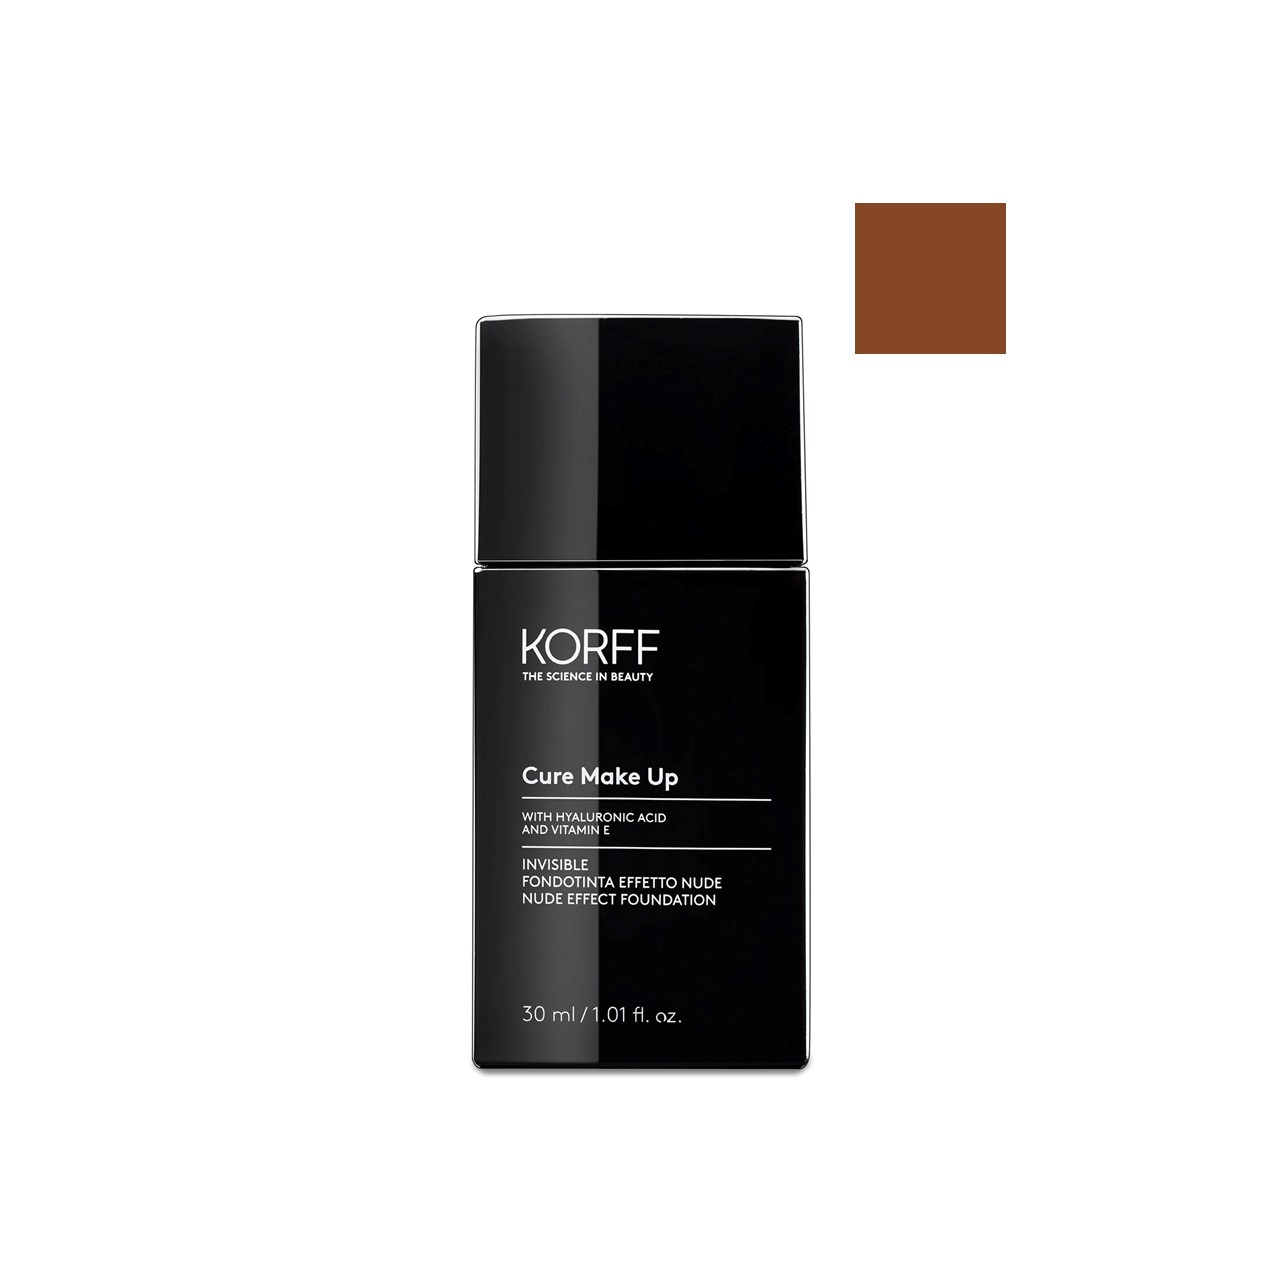 Korff Cure Make-Up Invisible Nude Effect Foundation 06 30ml (1.01 fl oz)